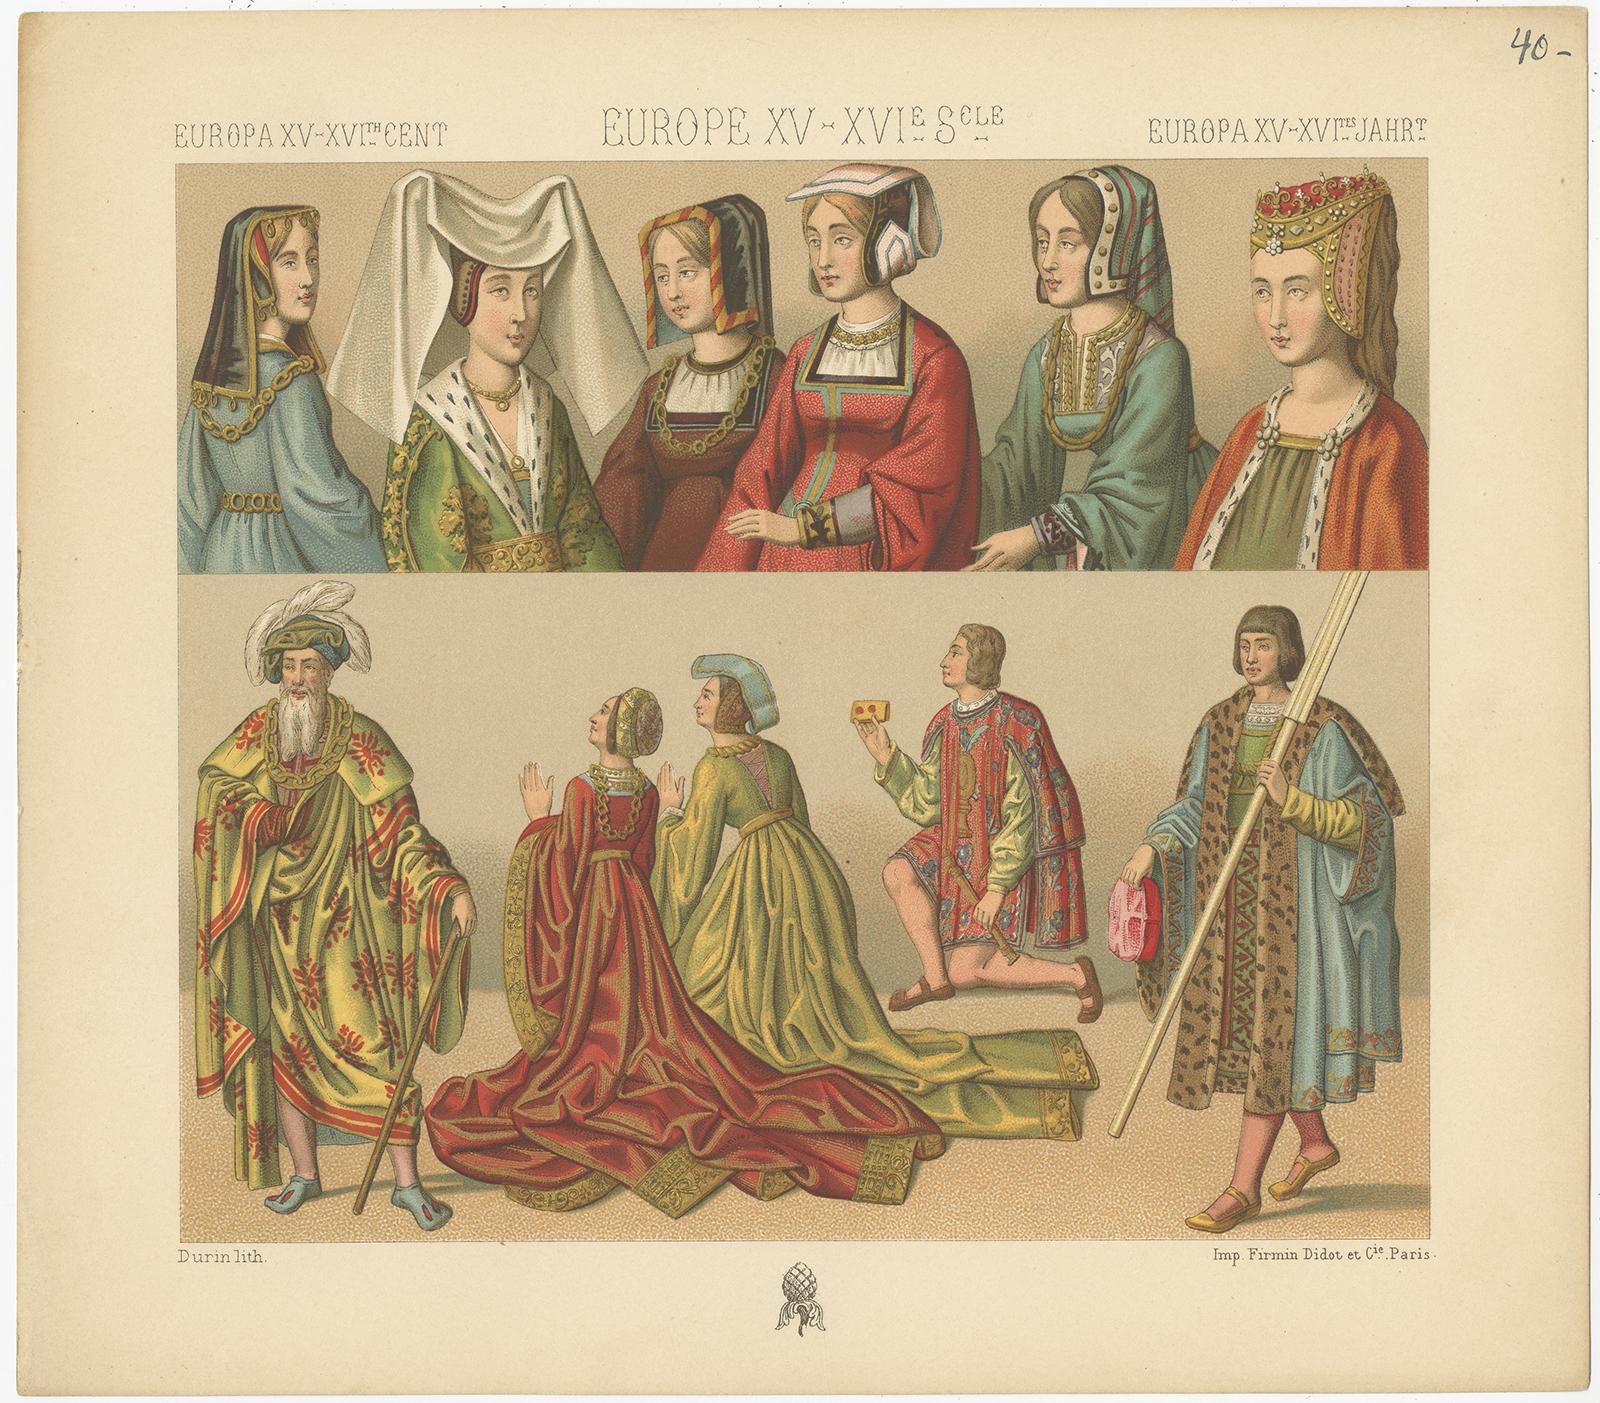 Antique print titled 'Europa XV-XVIth Cent - Europe XV-XVIe, Sele - Europa XV-XVItes Jahr'. Chromolithograph of European 15th-16th century costumes. This print originates from 'Le Costume Historique' by M.A. Racinet. Published, circa 1880.